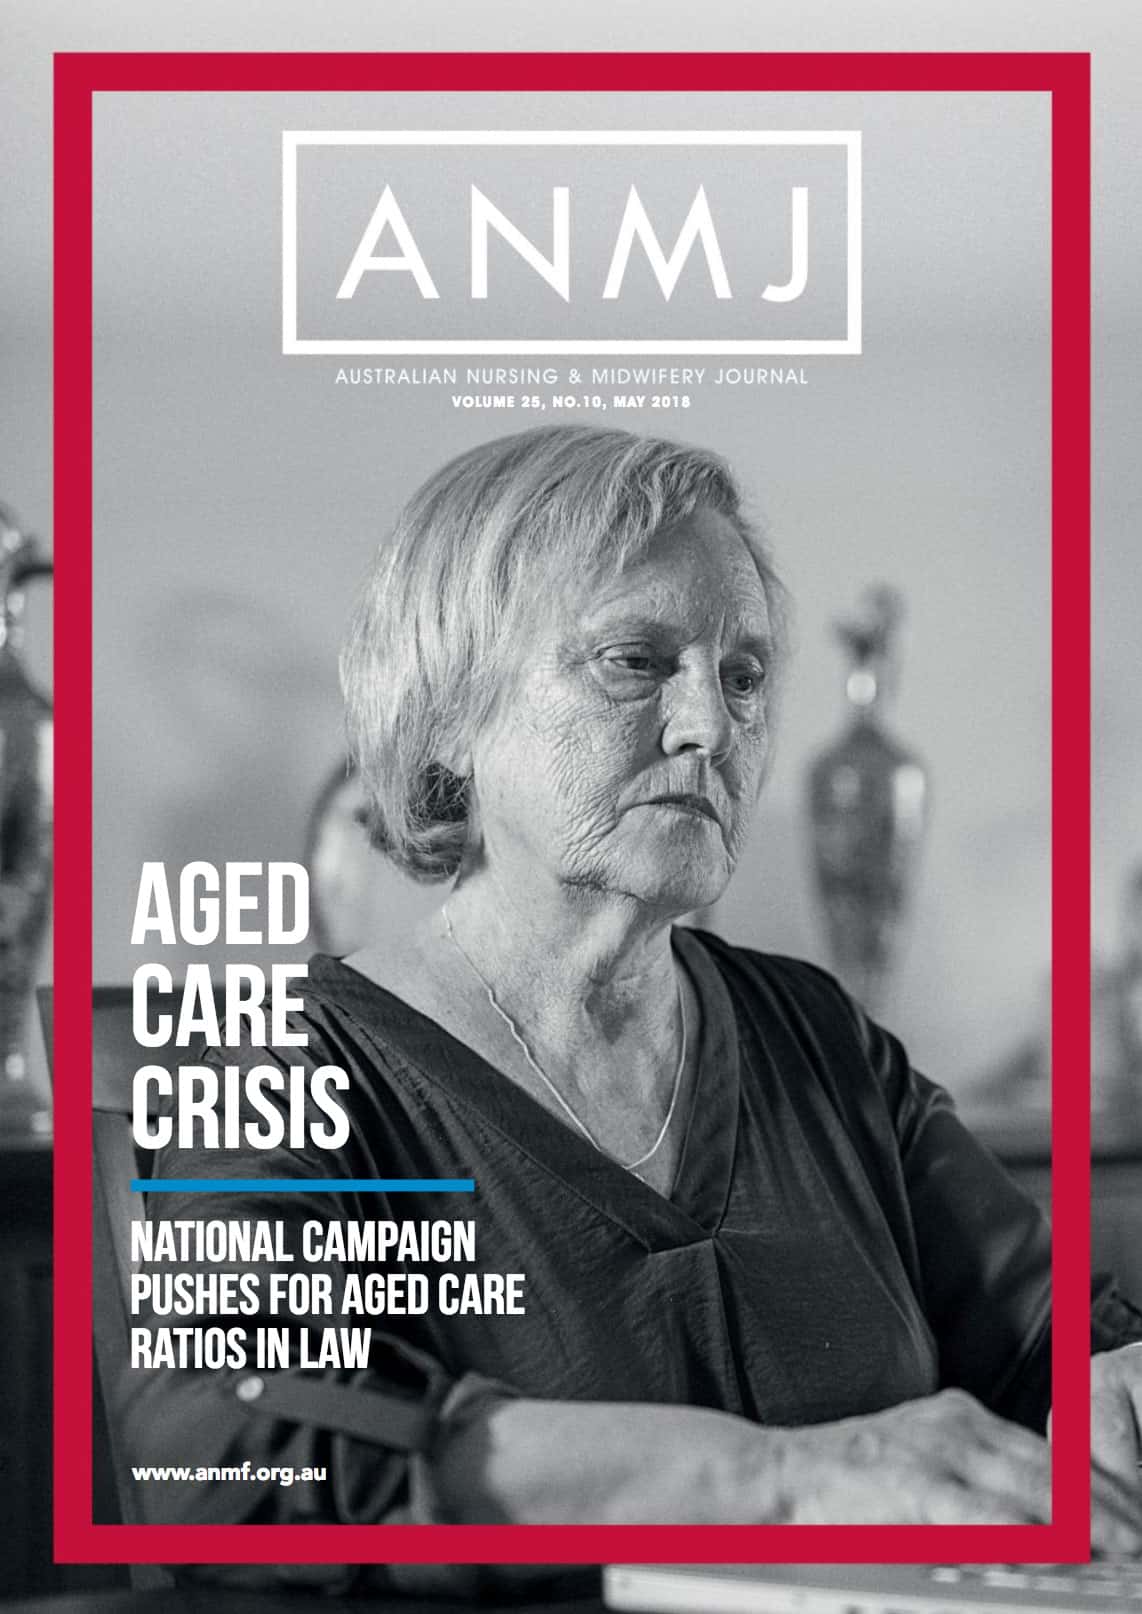 ANMJ May 2018 Issue